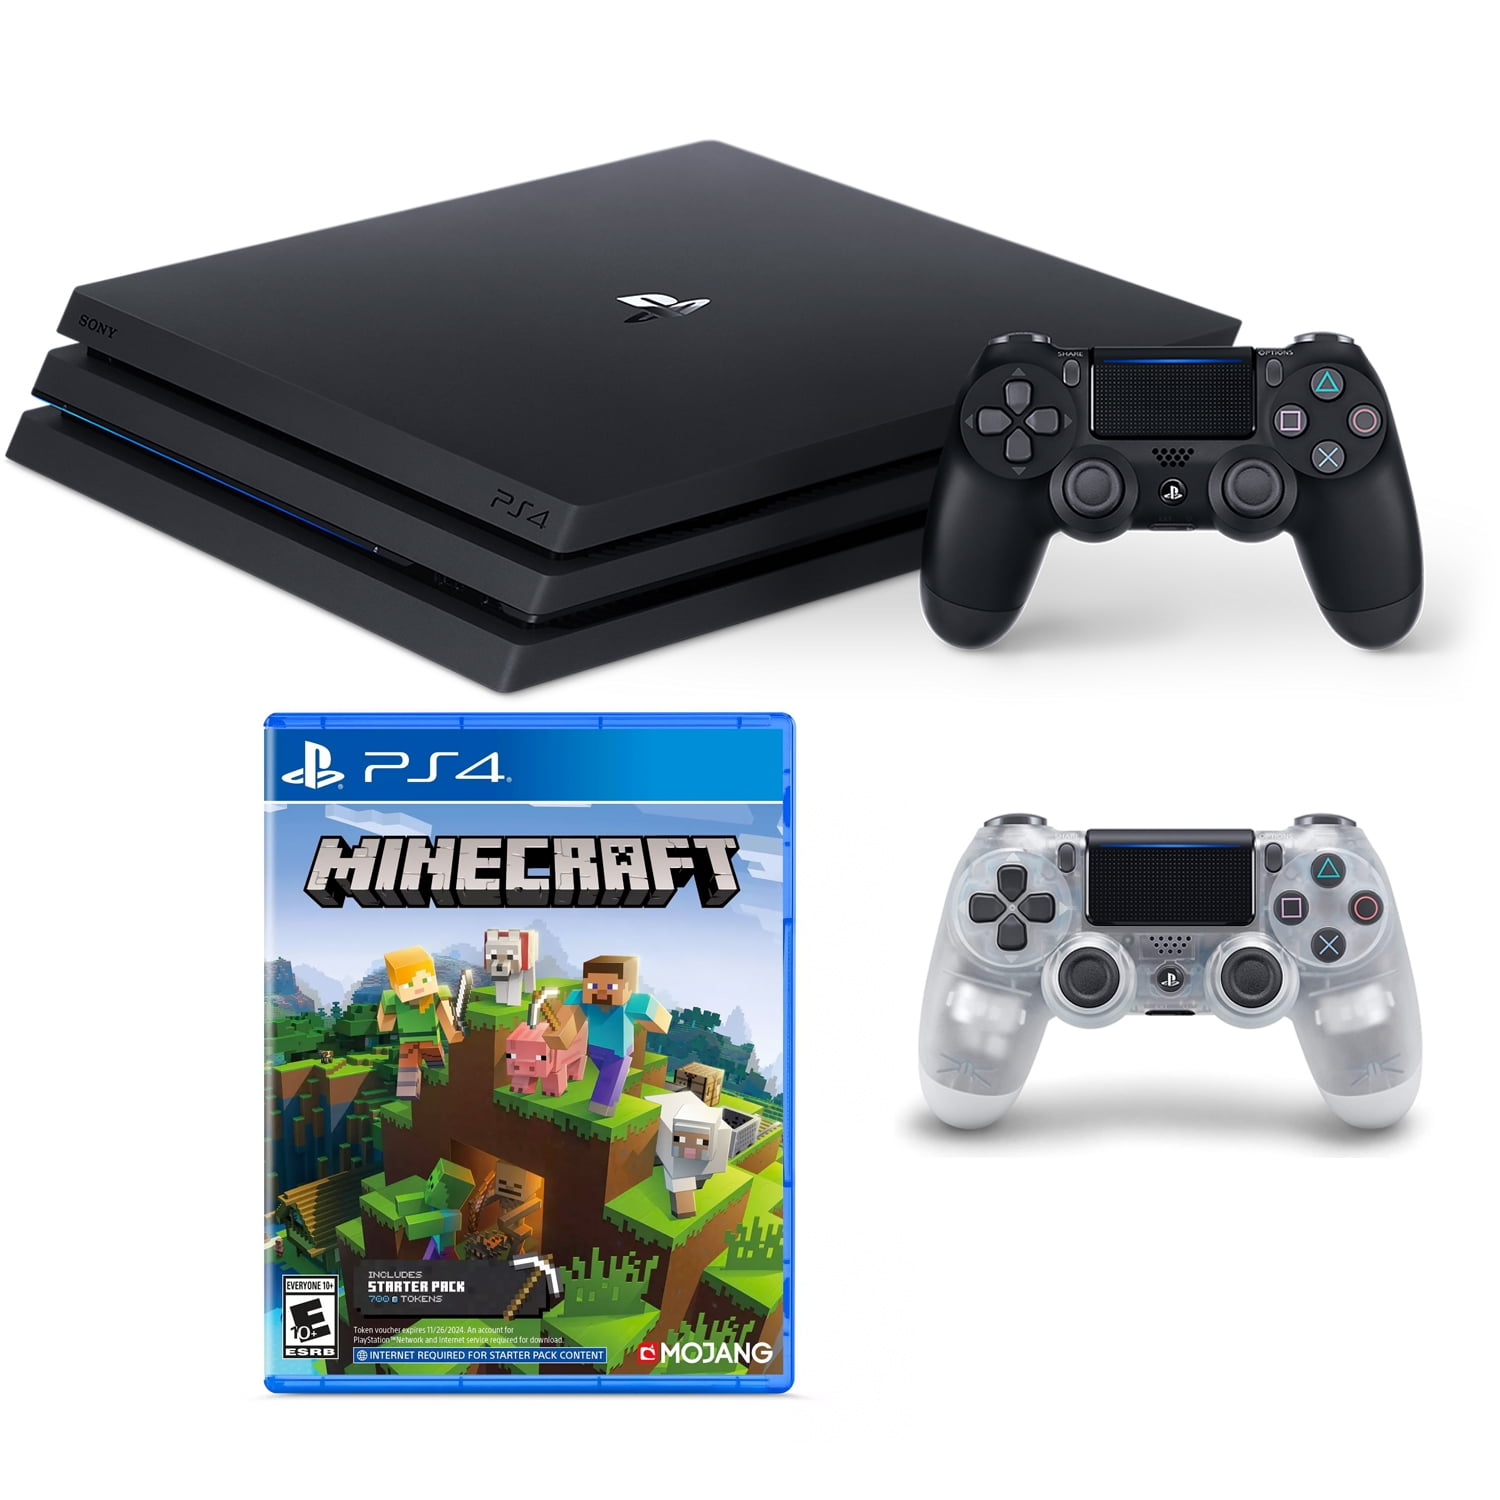 Minecraft Game, PS4 Console and Crystal Controller Bundle, Sony